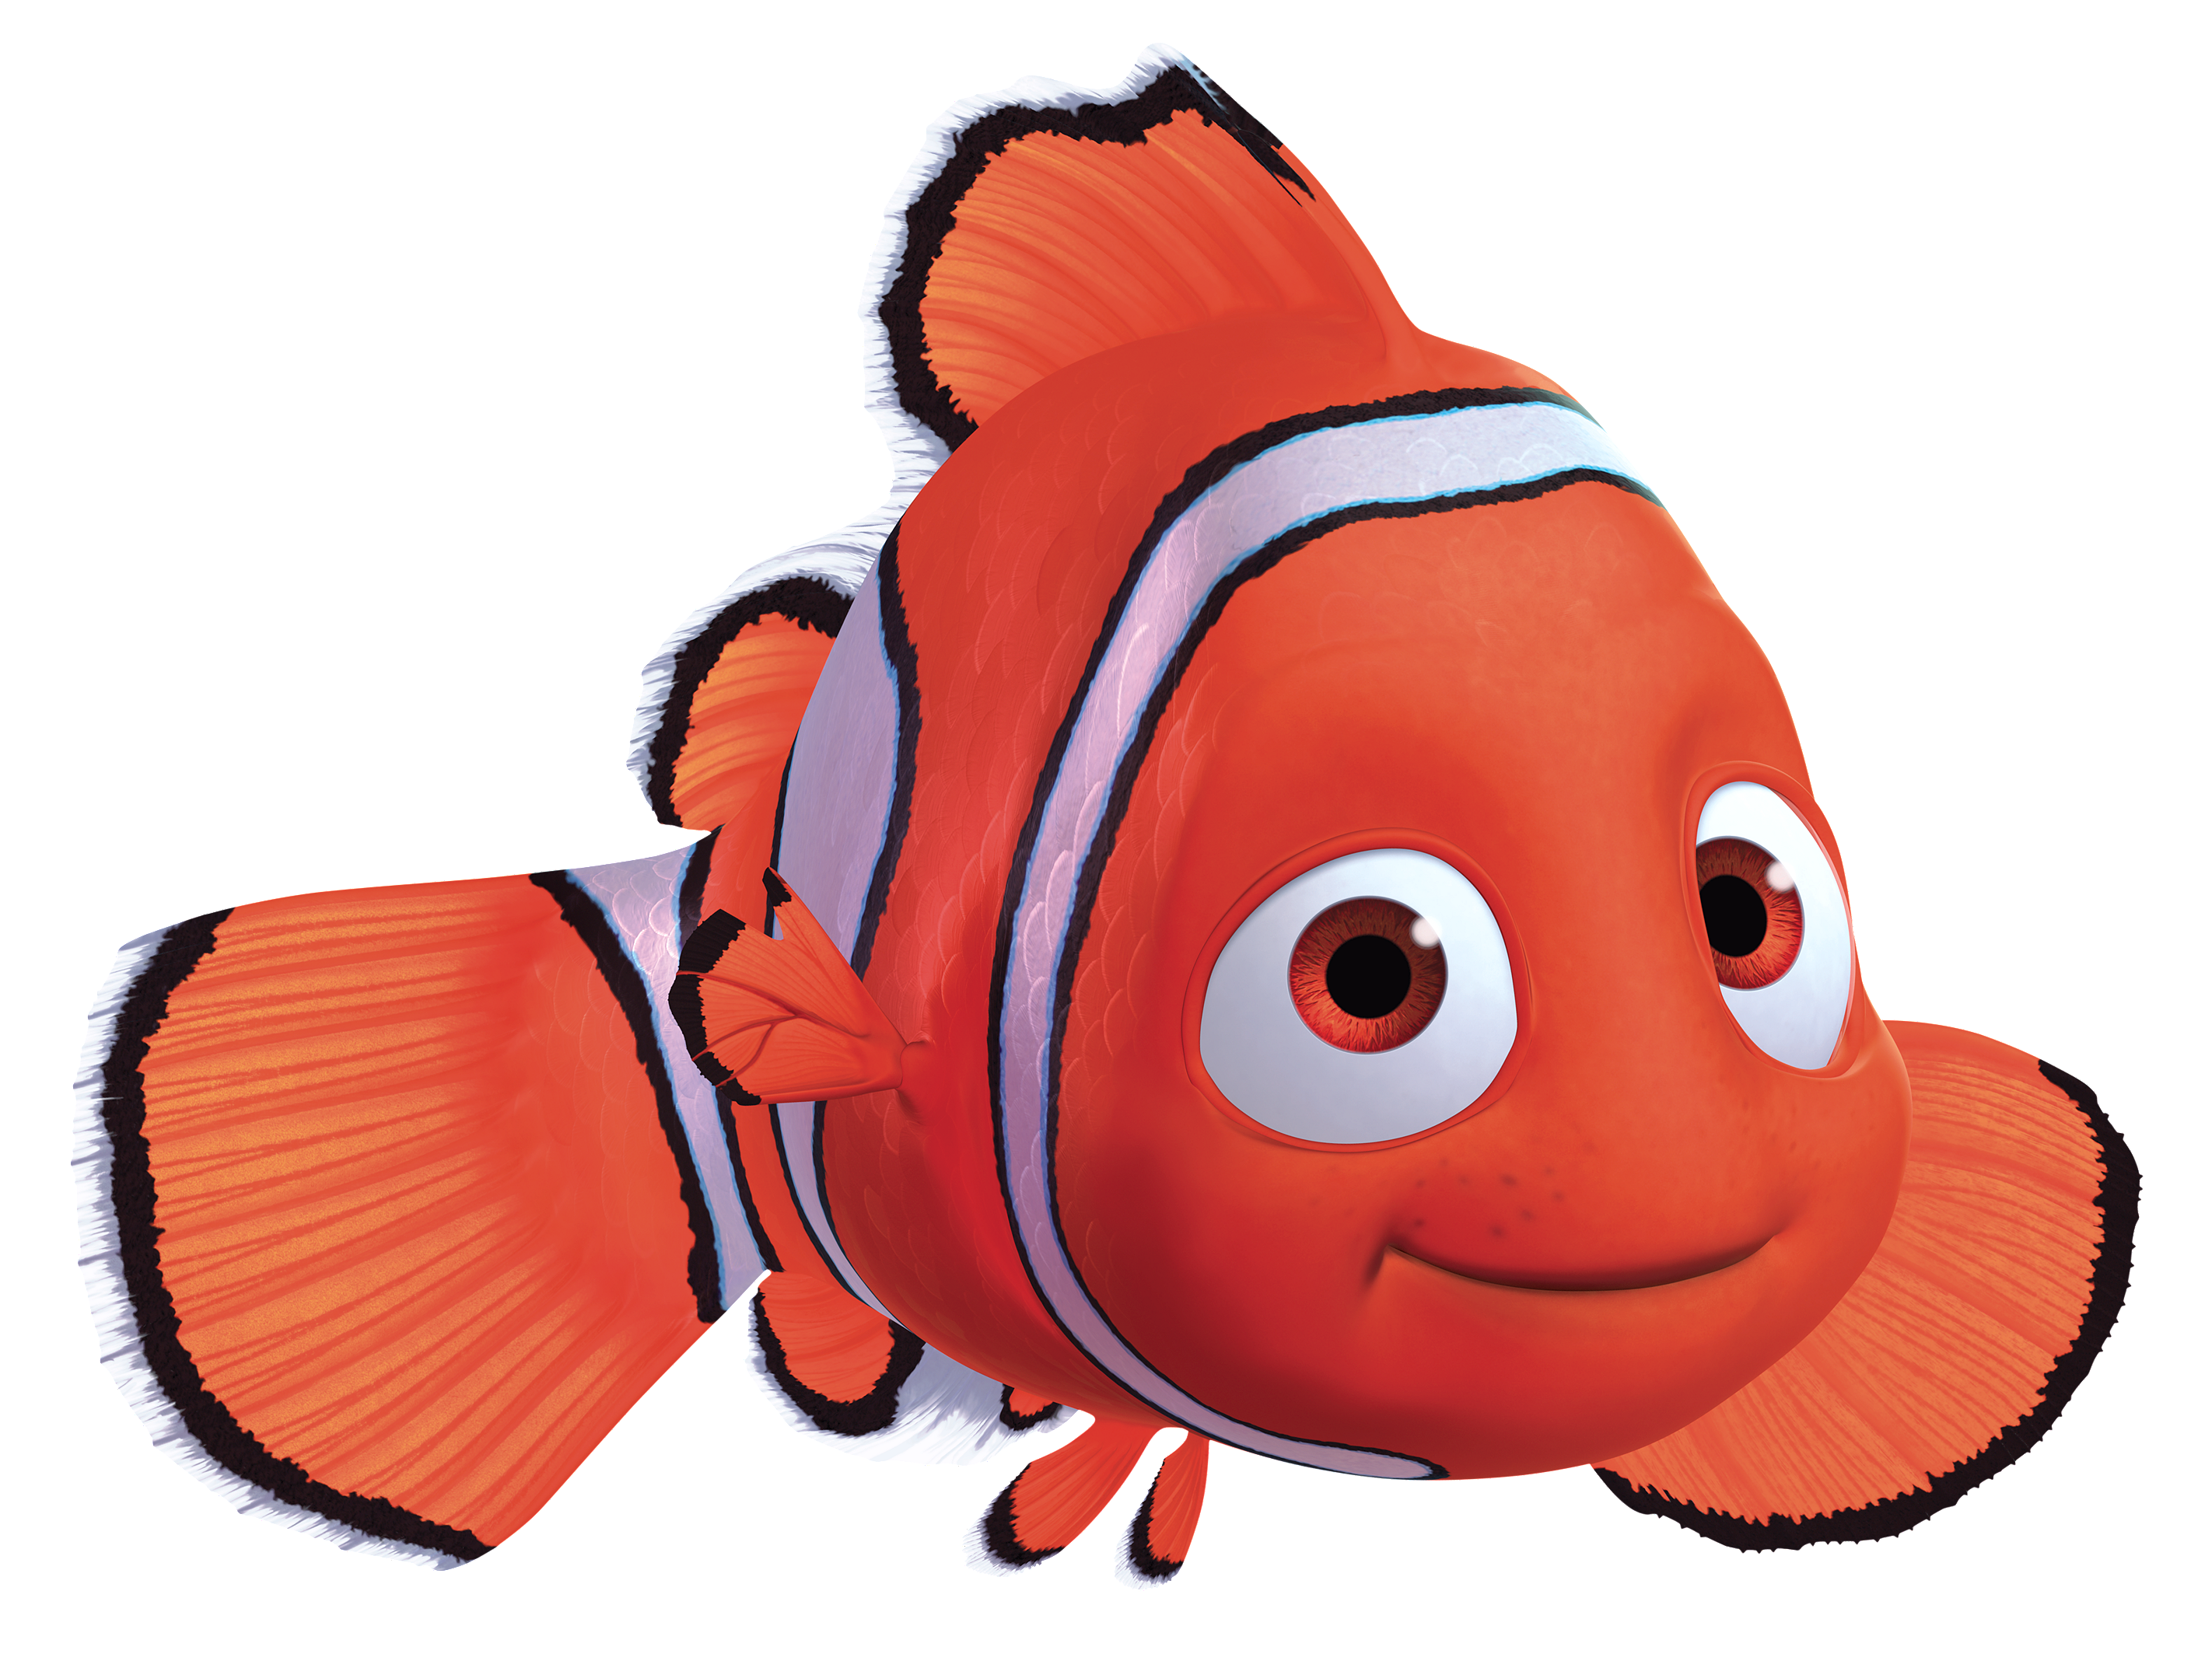 Nemo characters clipart